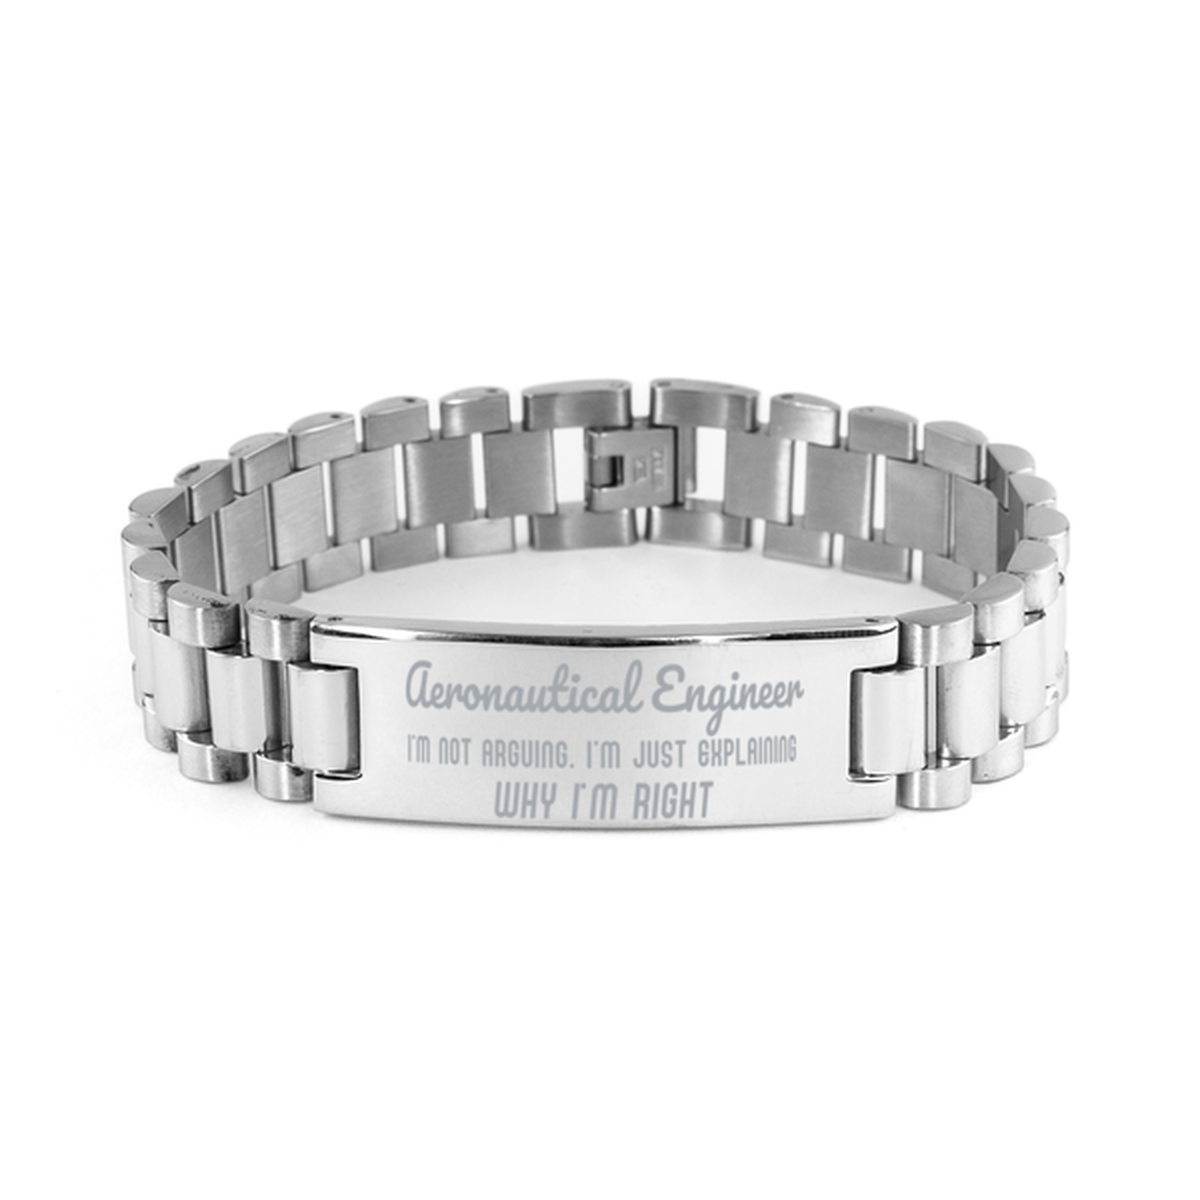 Aeronautical Engineer I'm not Arguing. I'm Just Explaining Why I'm RIGHT Ladder Stainless Steel Bracelet, Graduation Birthday Christmas Aeronautical Engineer Gifts For Aeronautical Engineer Funny Saying Quote Present for Men Women Coworker